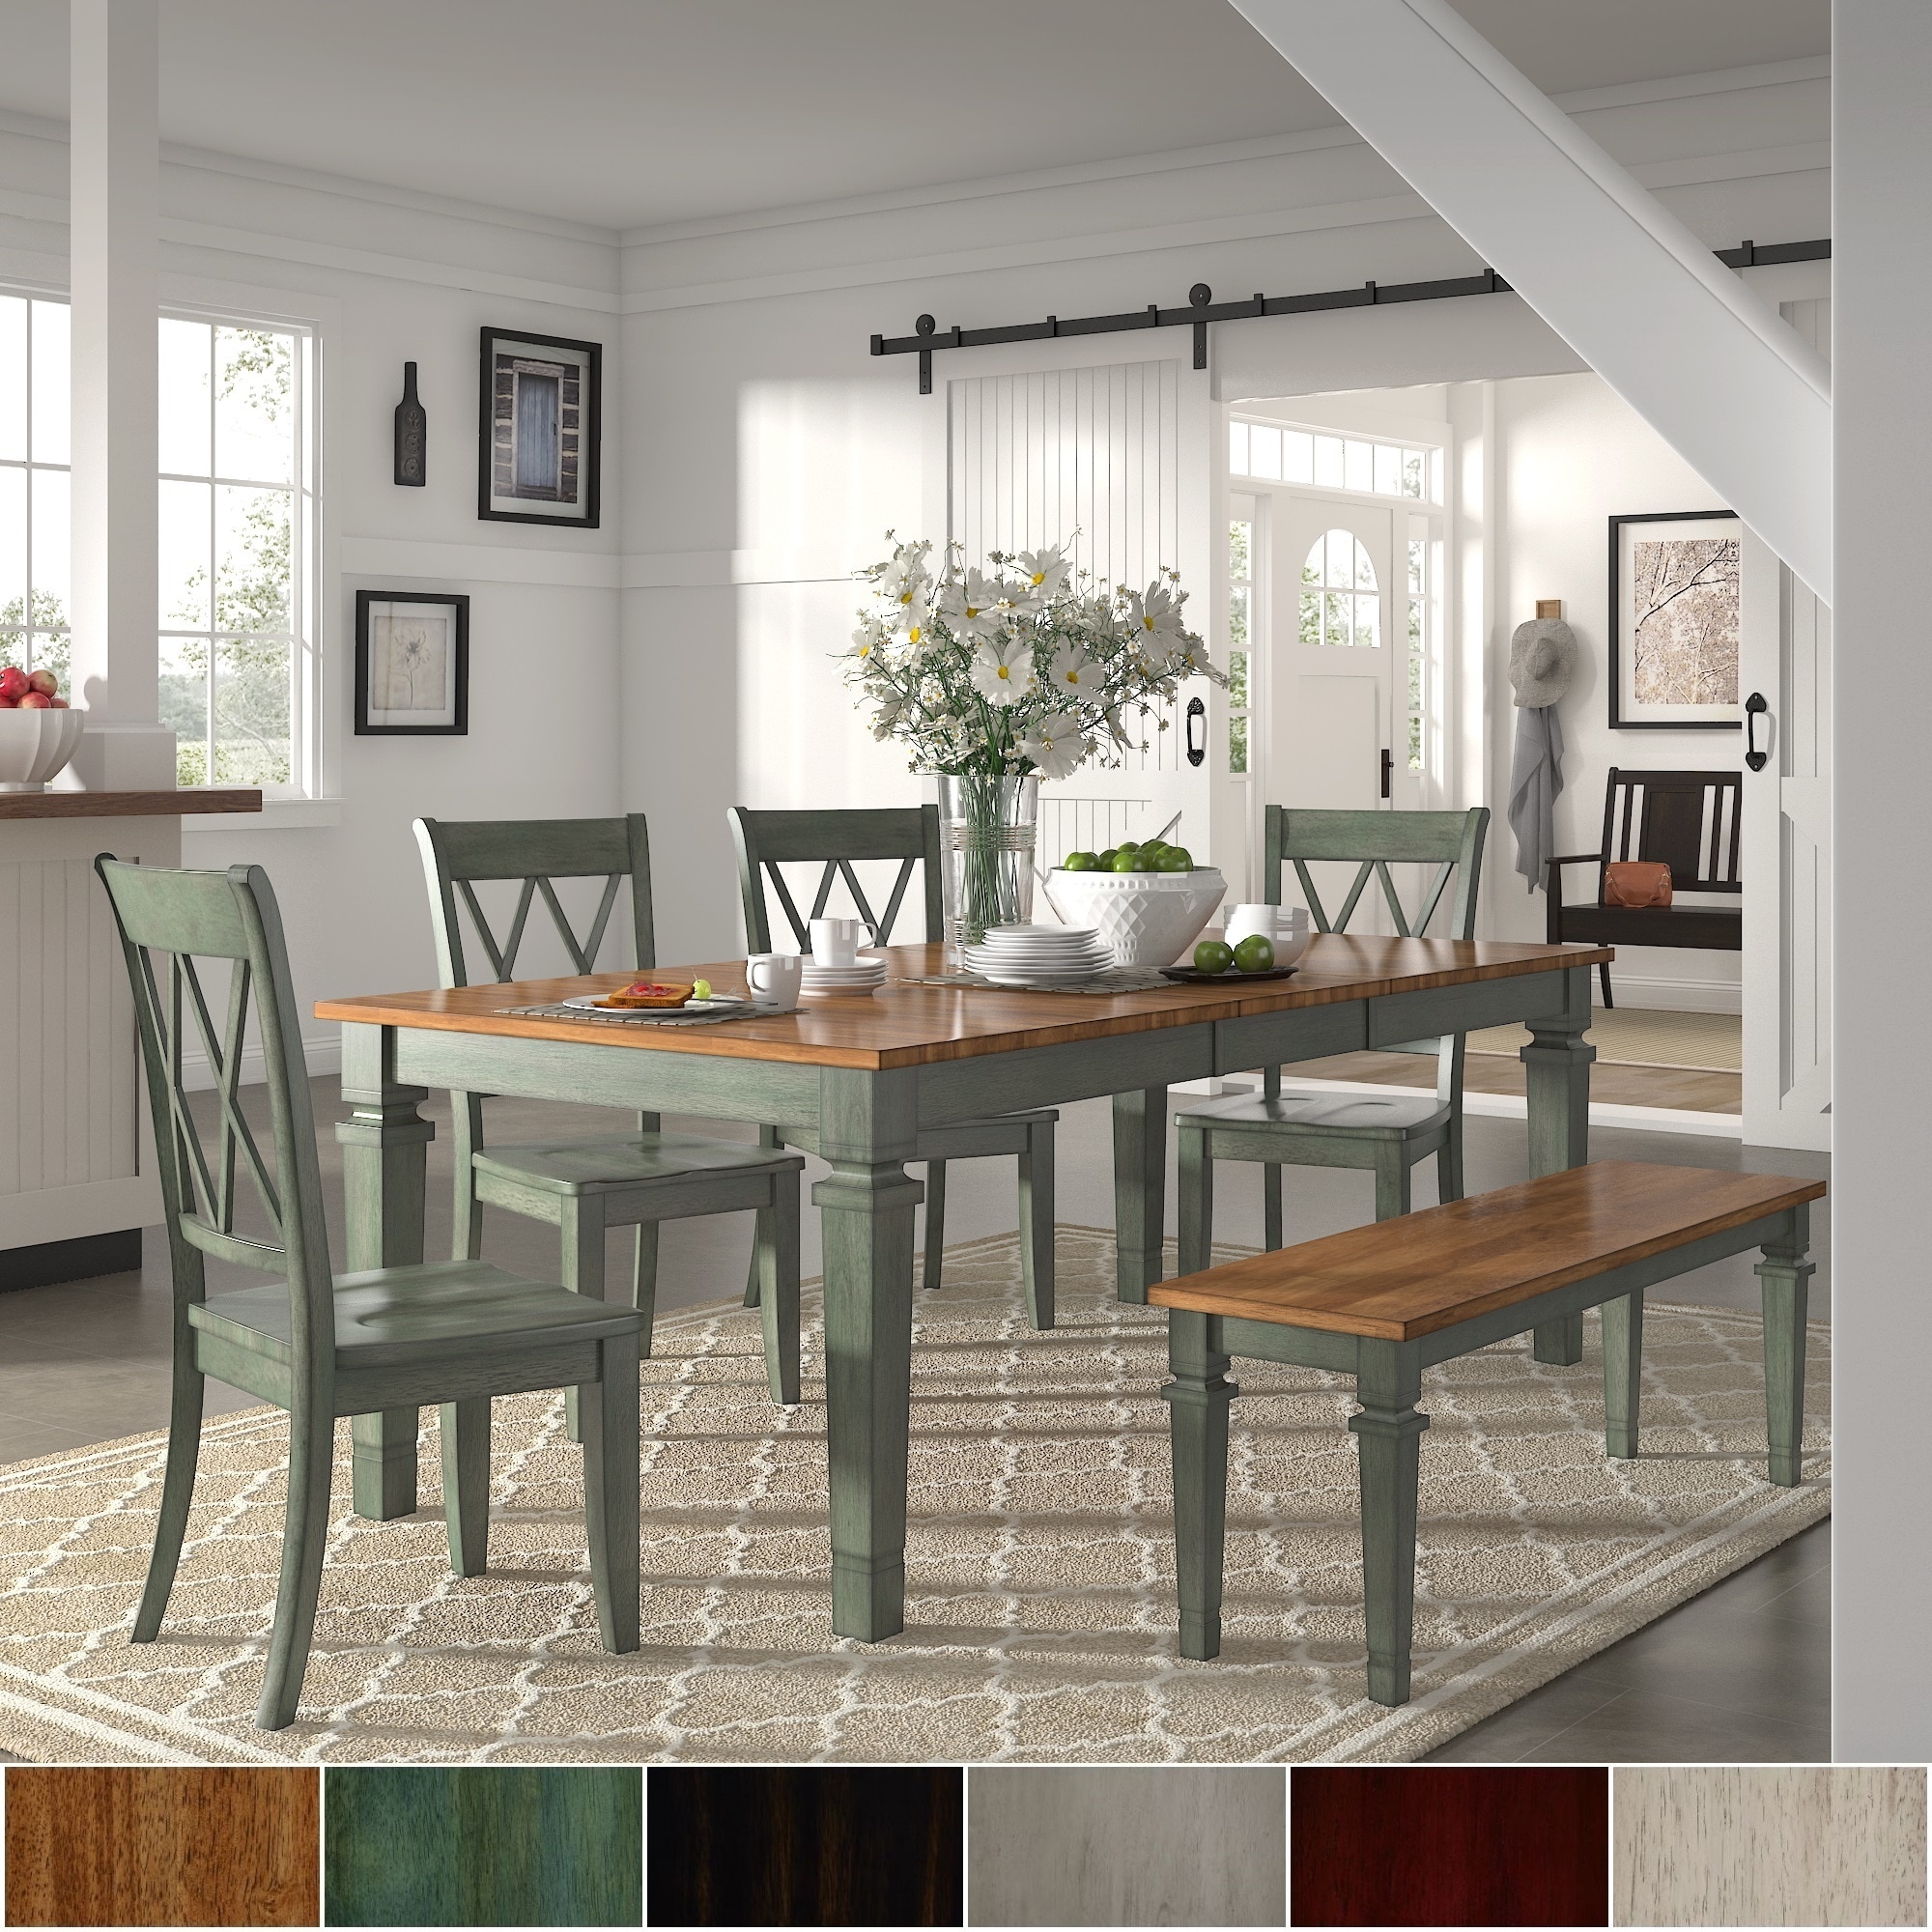 Elena Antique Sage Green Extendable Rectangular Dining Set Double X Back By Inspire Q Classic On Sale Overstock 20978995